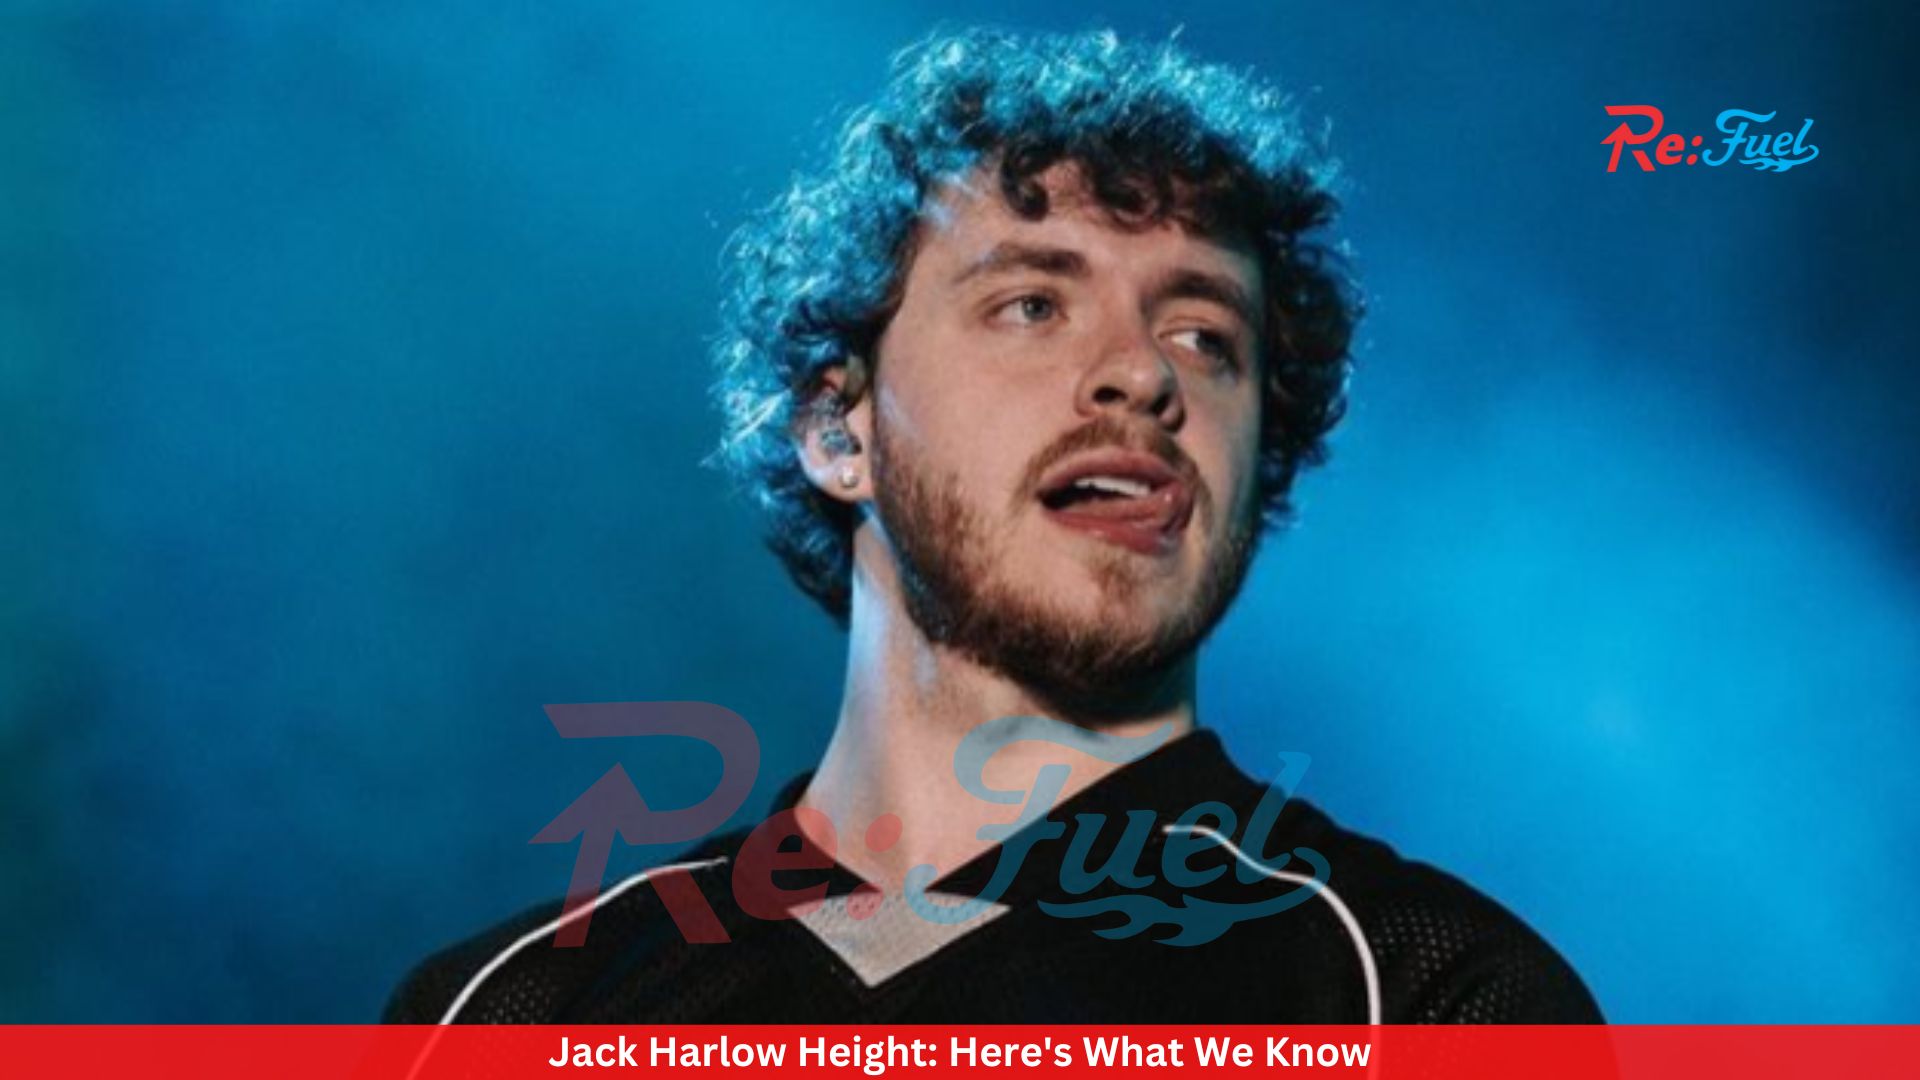 Jack Harlow Height: Here's What We Know